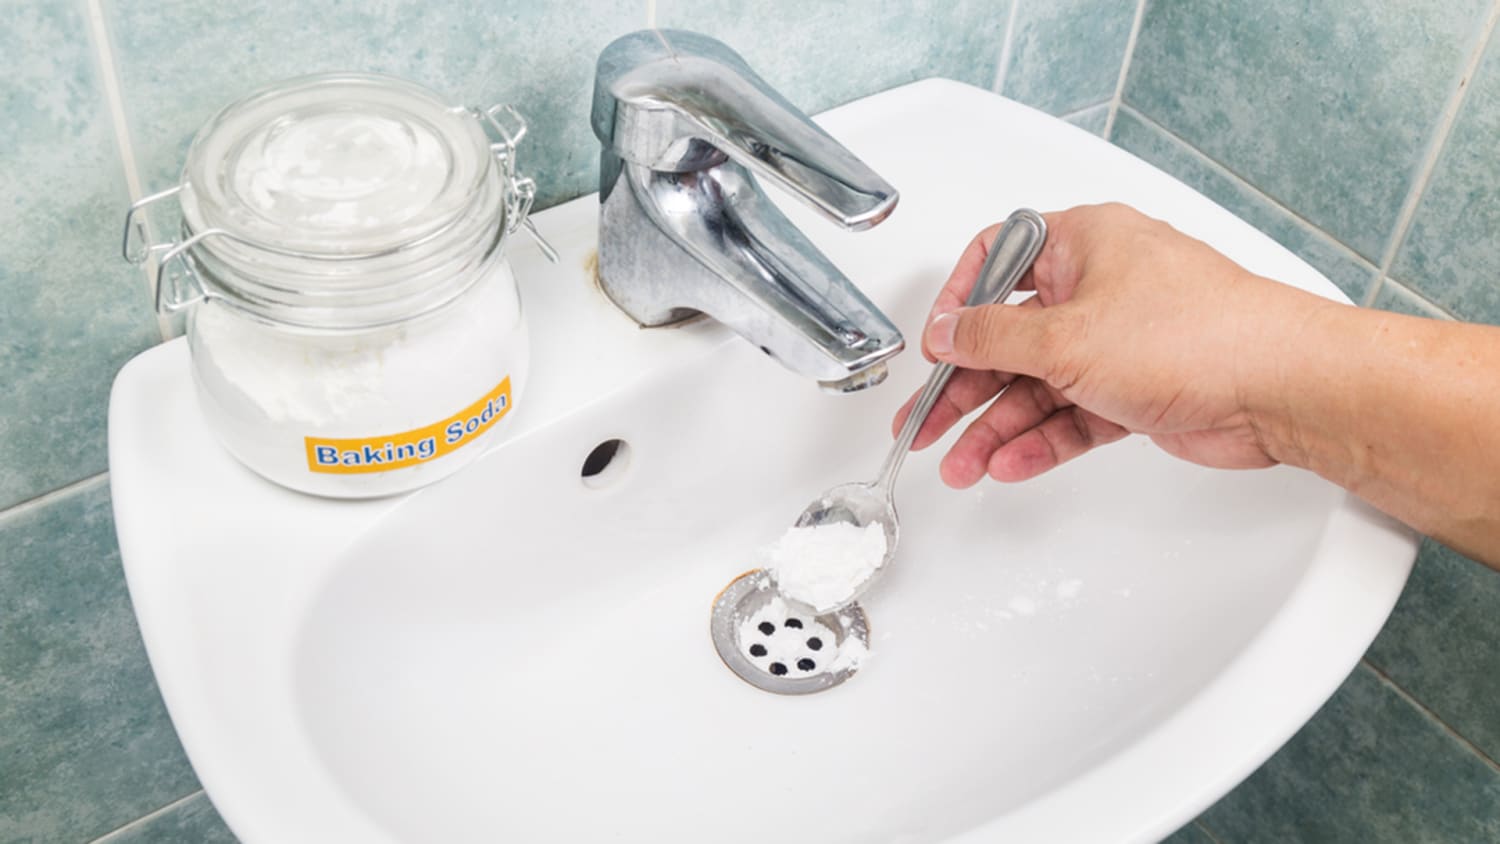 Unclog A Drain Without Calling Plumber, Best Way To Clear Slow Draining Bathroom Sink